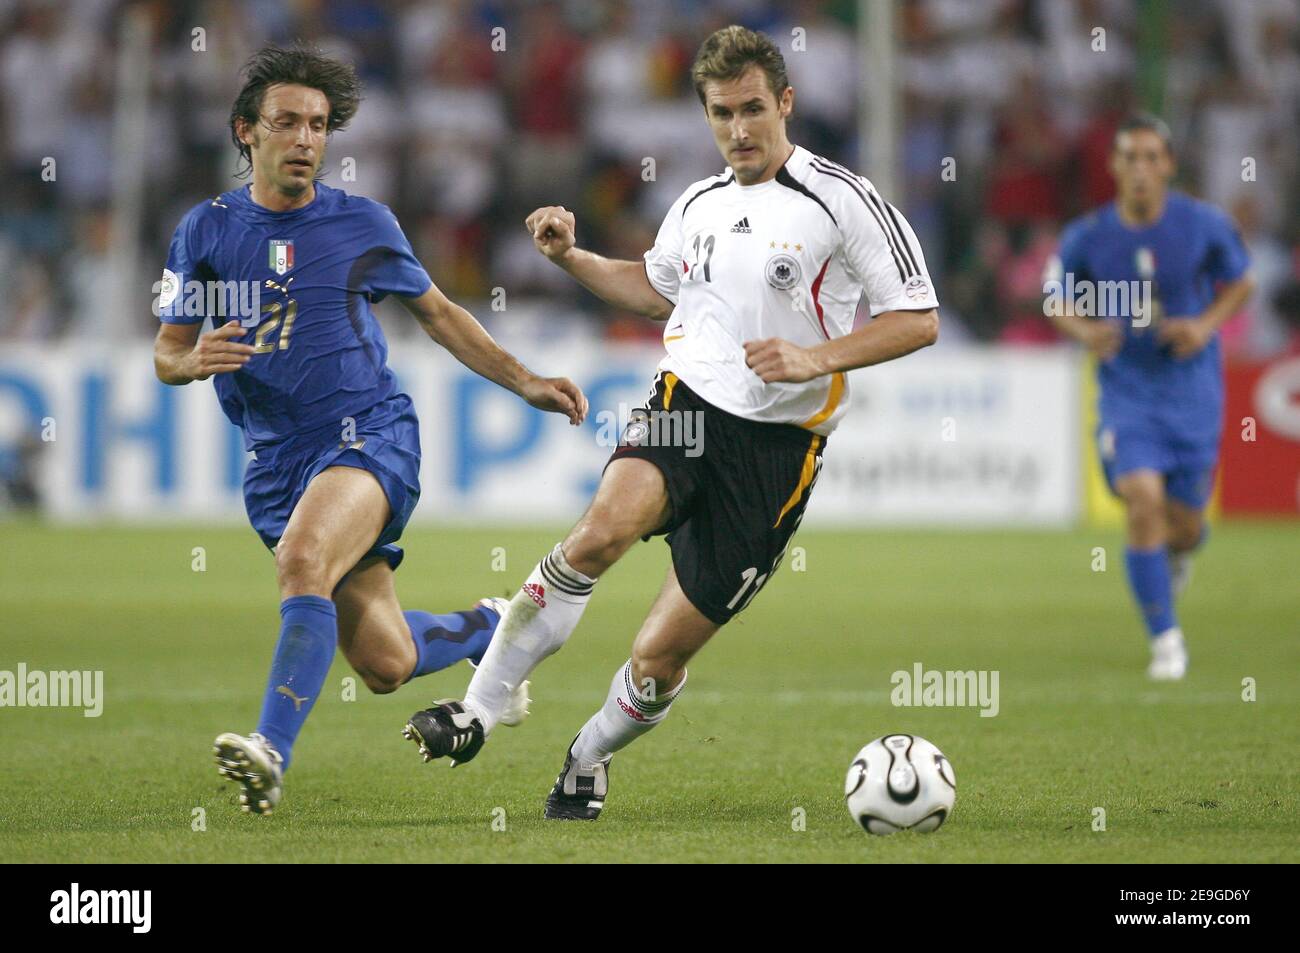 Italy's Andrea Pirlo and Miroslav Klose in action during the World Cup 2006, semifinals, Italy vs Germany at the Signal Iduna Park stadium in Dortmund, Germany on July 4, 2006. Italy won 2-0. Photo by Christian Liewig/ABACAPRESS.COM Stock Photo